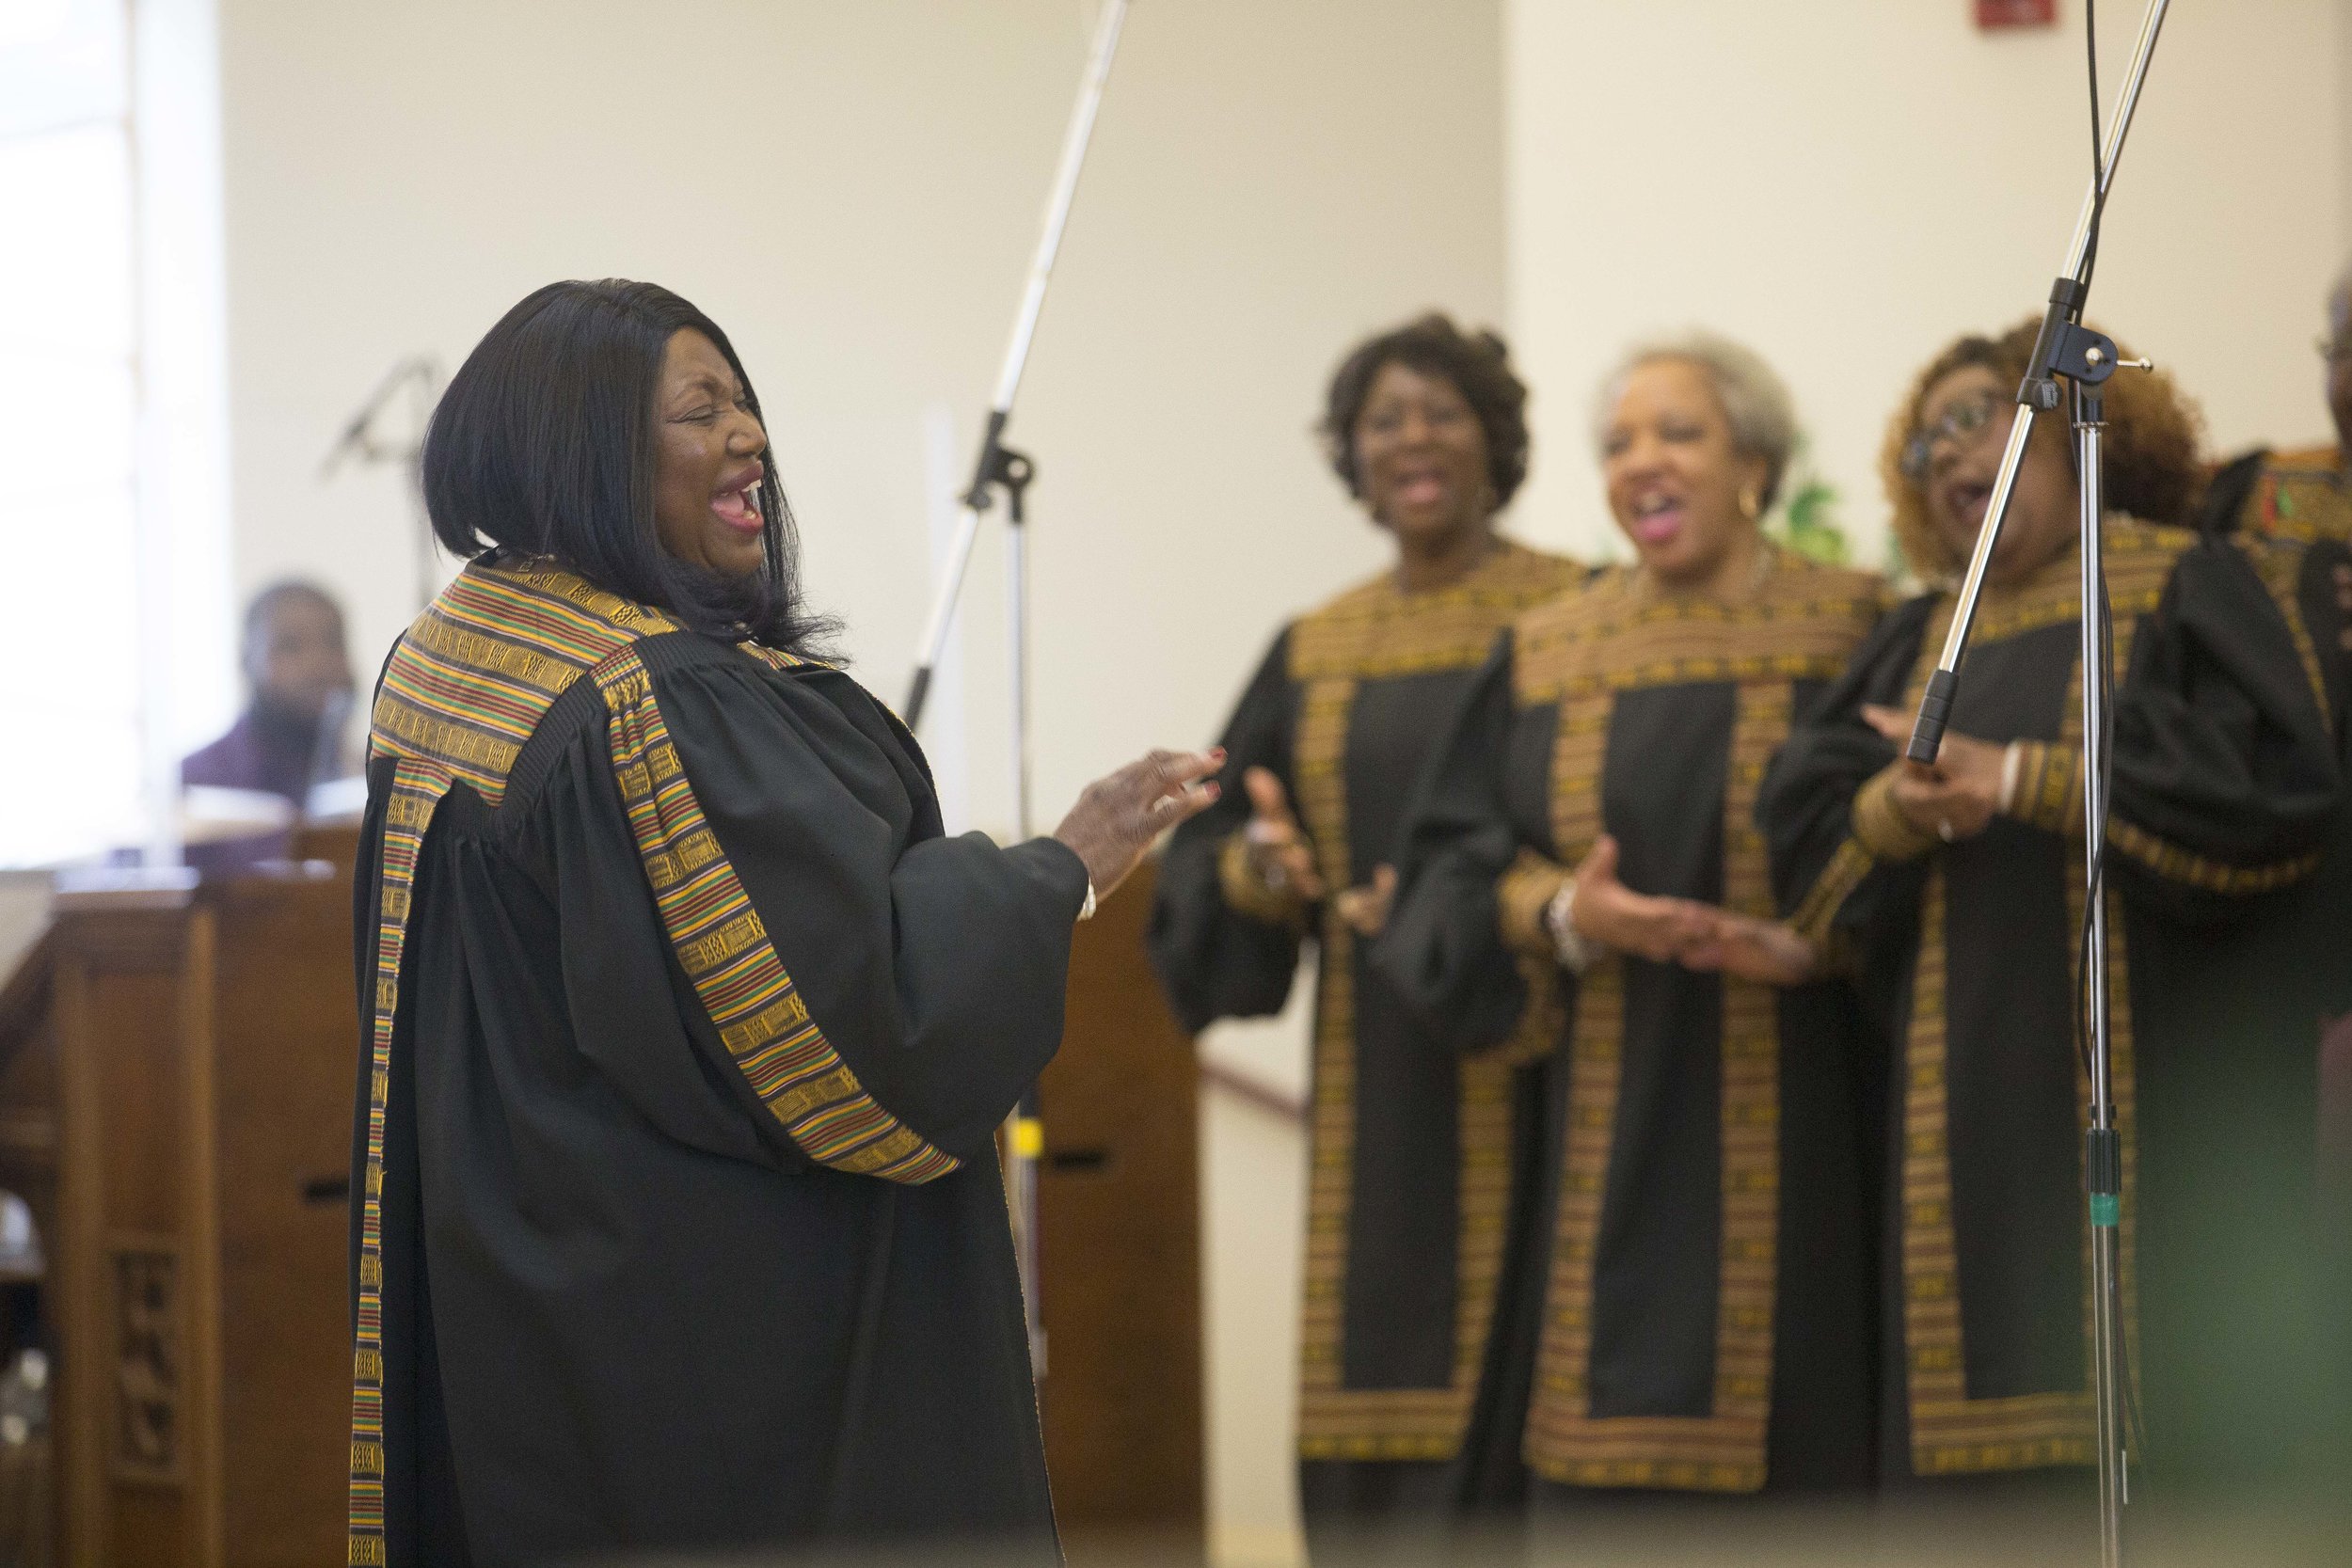 The New Hope Choir performed at a recent Black History Month performance at the church.